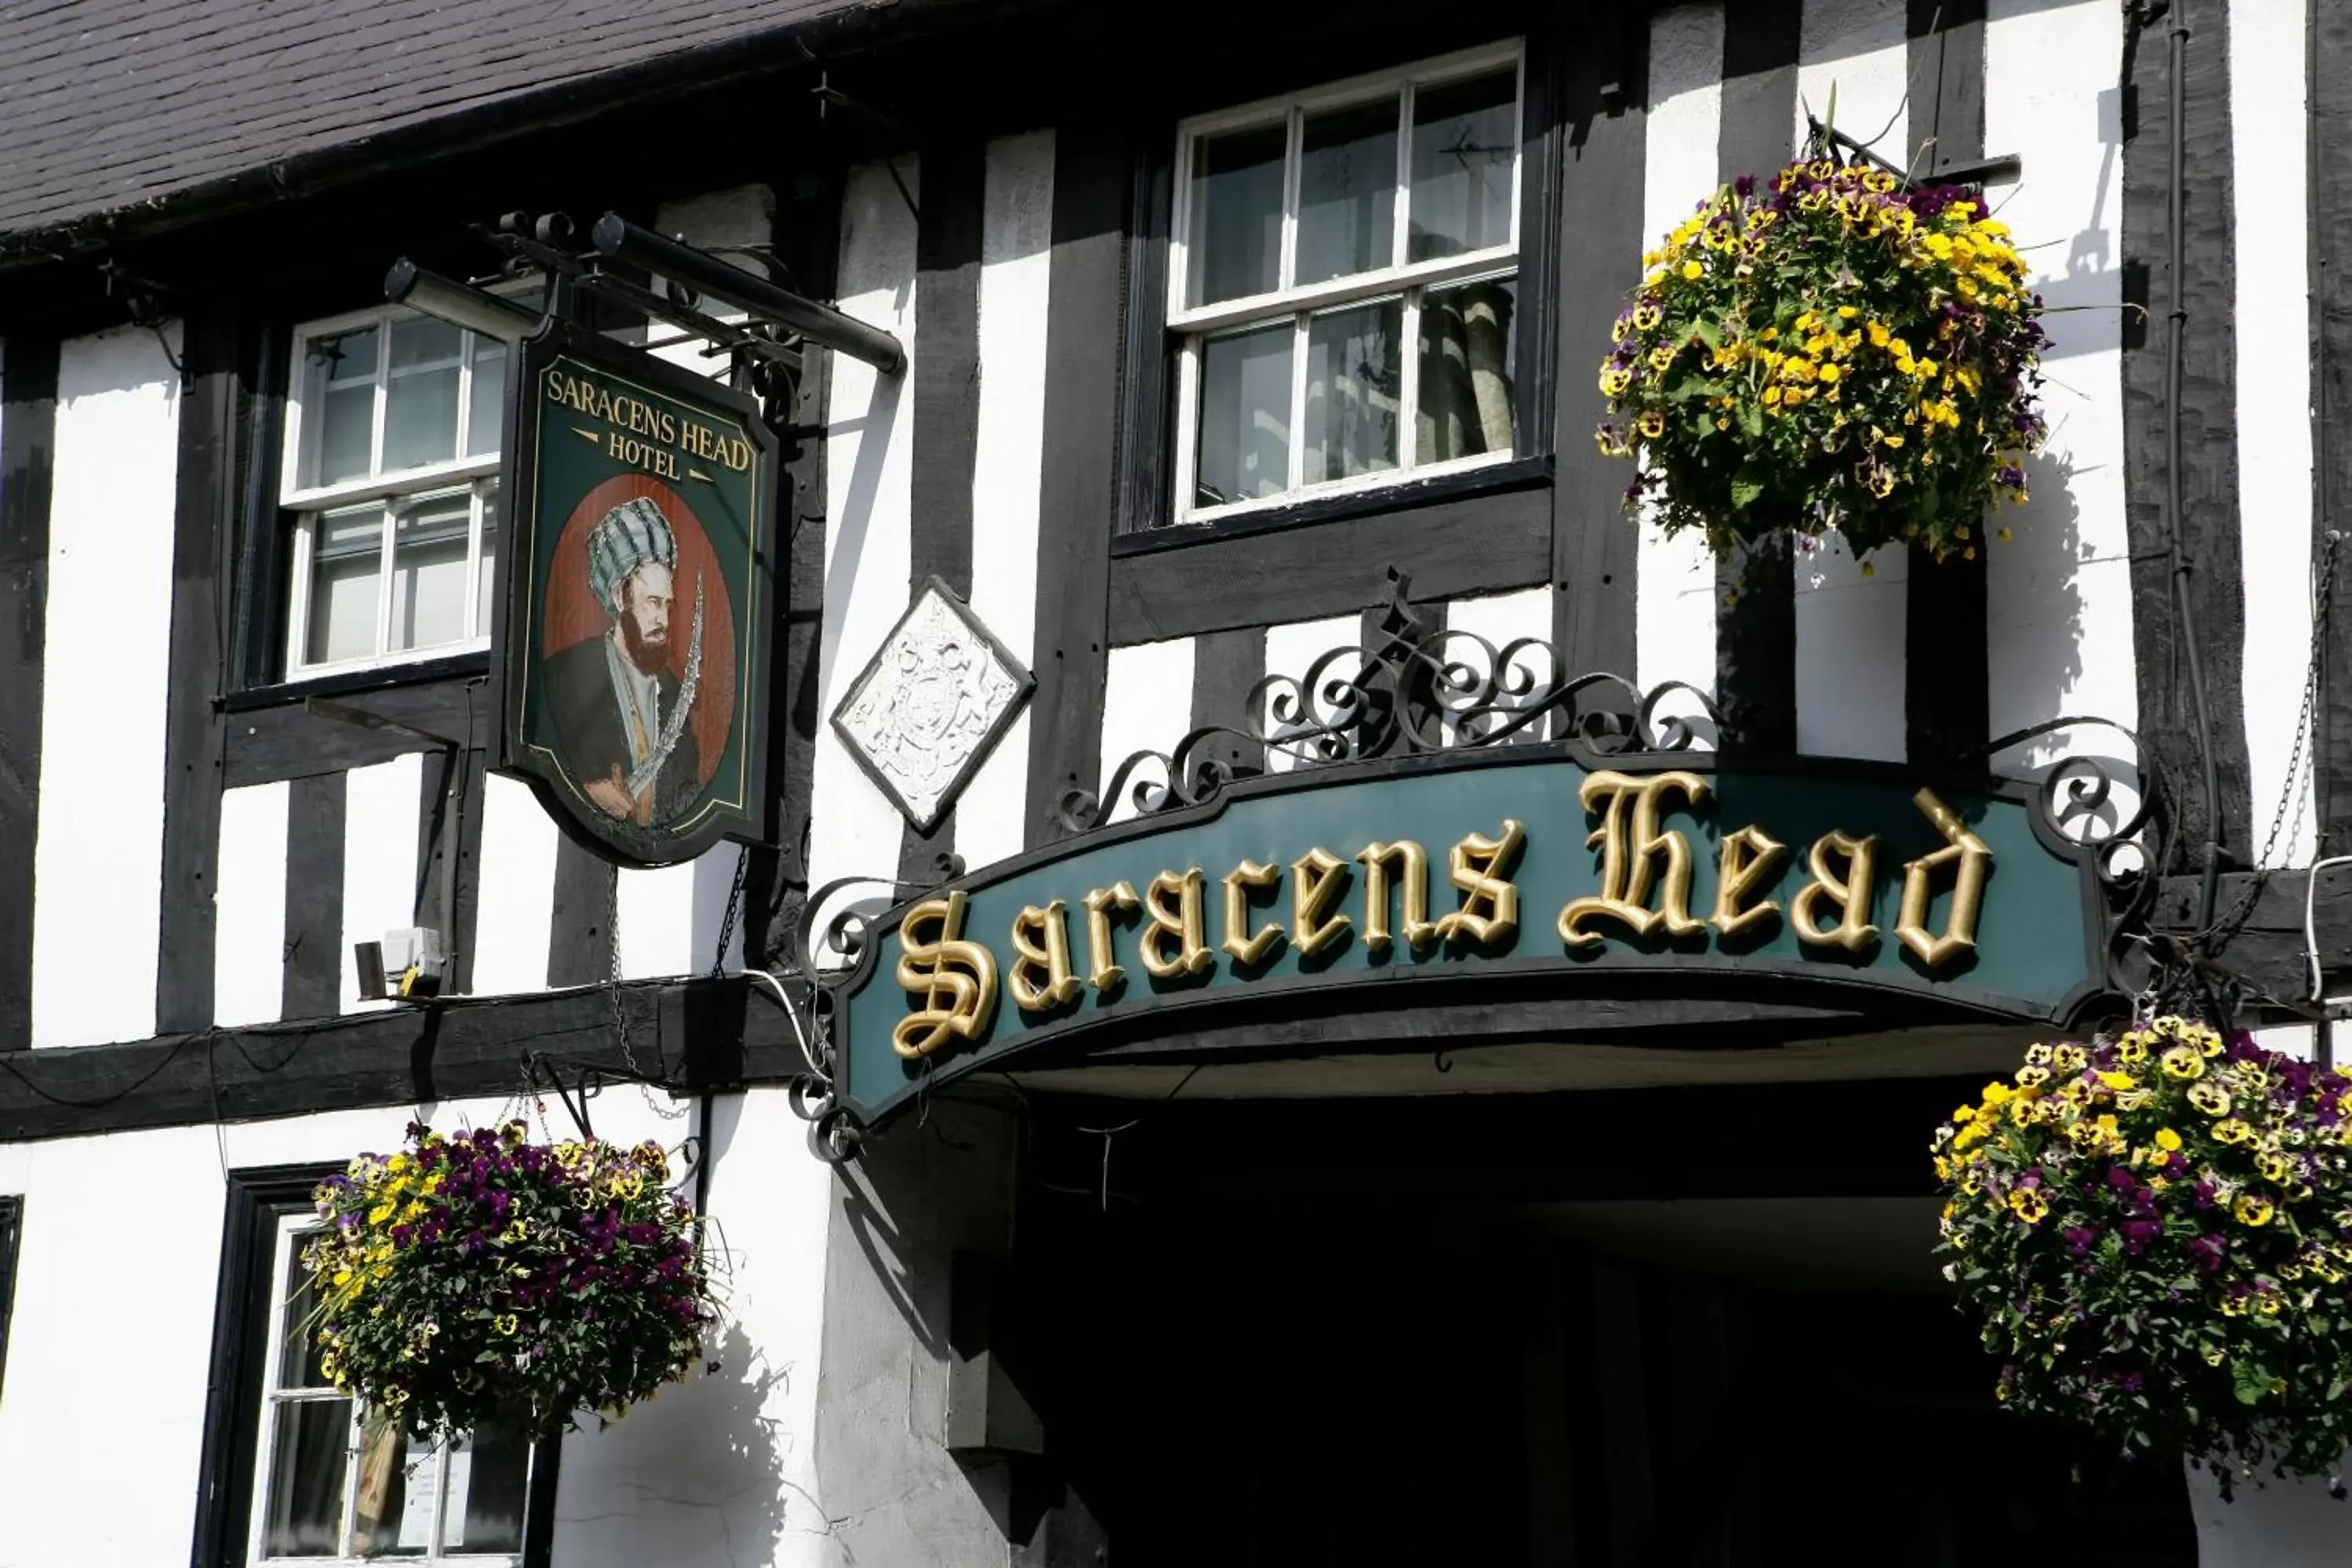 Property logo or sign, Property Logo/Sign in The Saracens Head Hotel